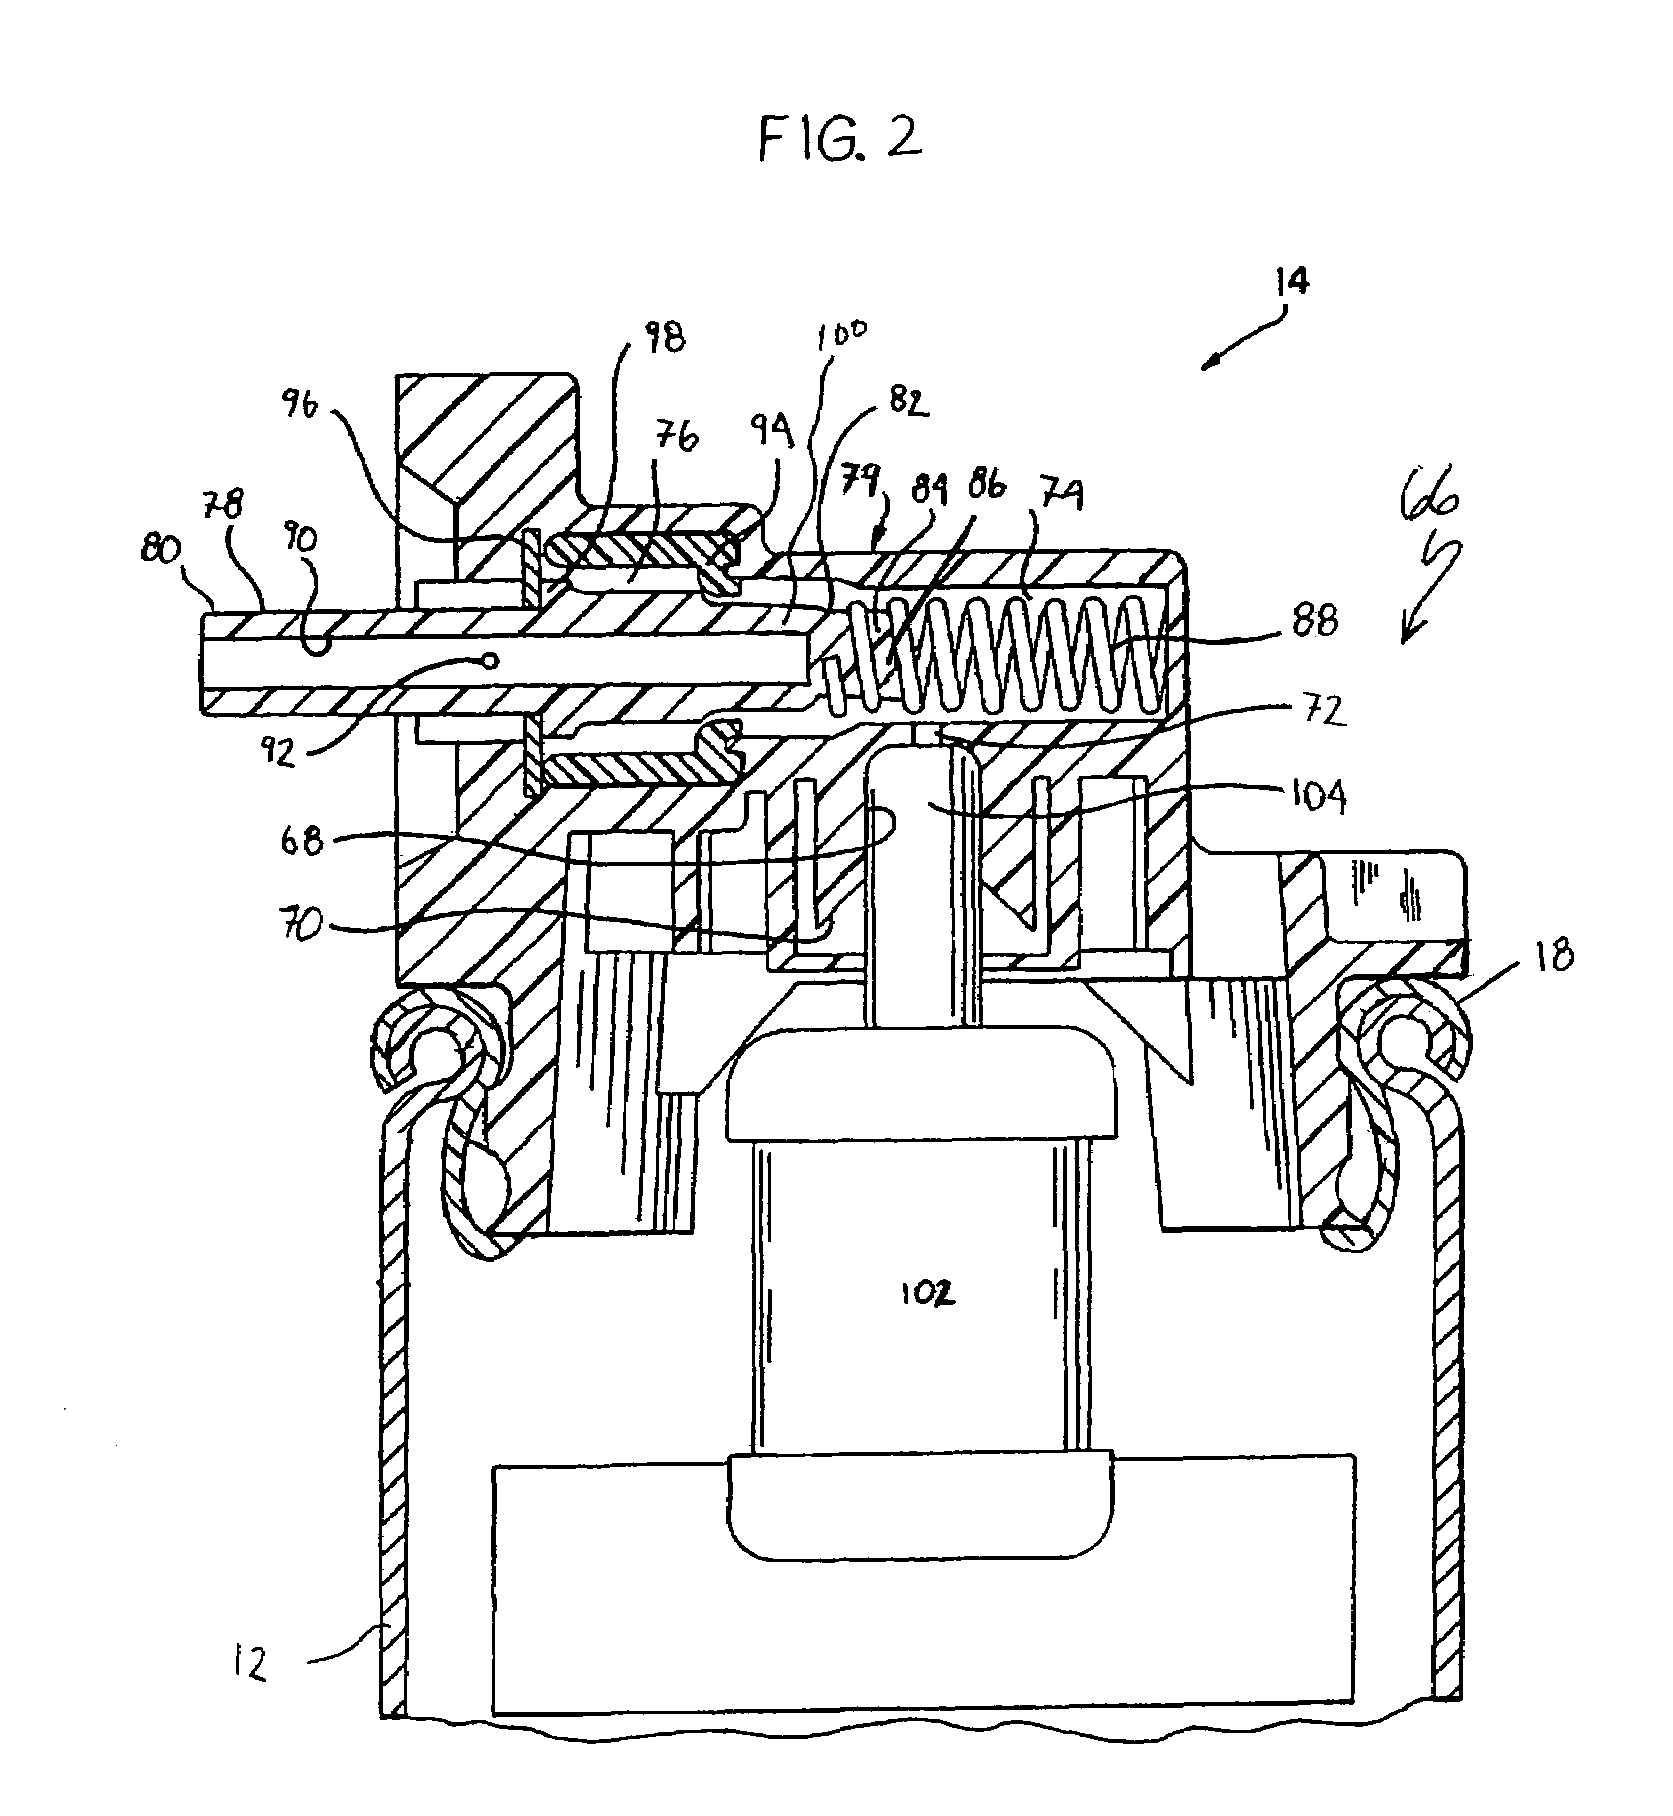 Fuel cell actuator and associated combustion tool